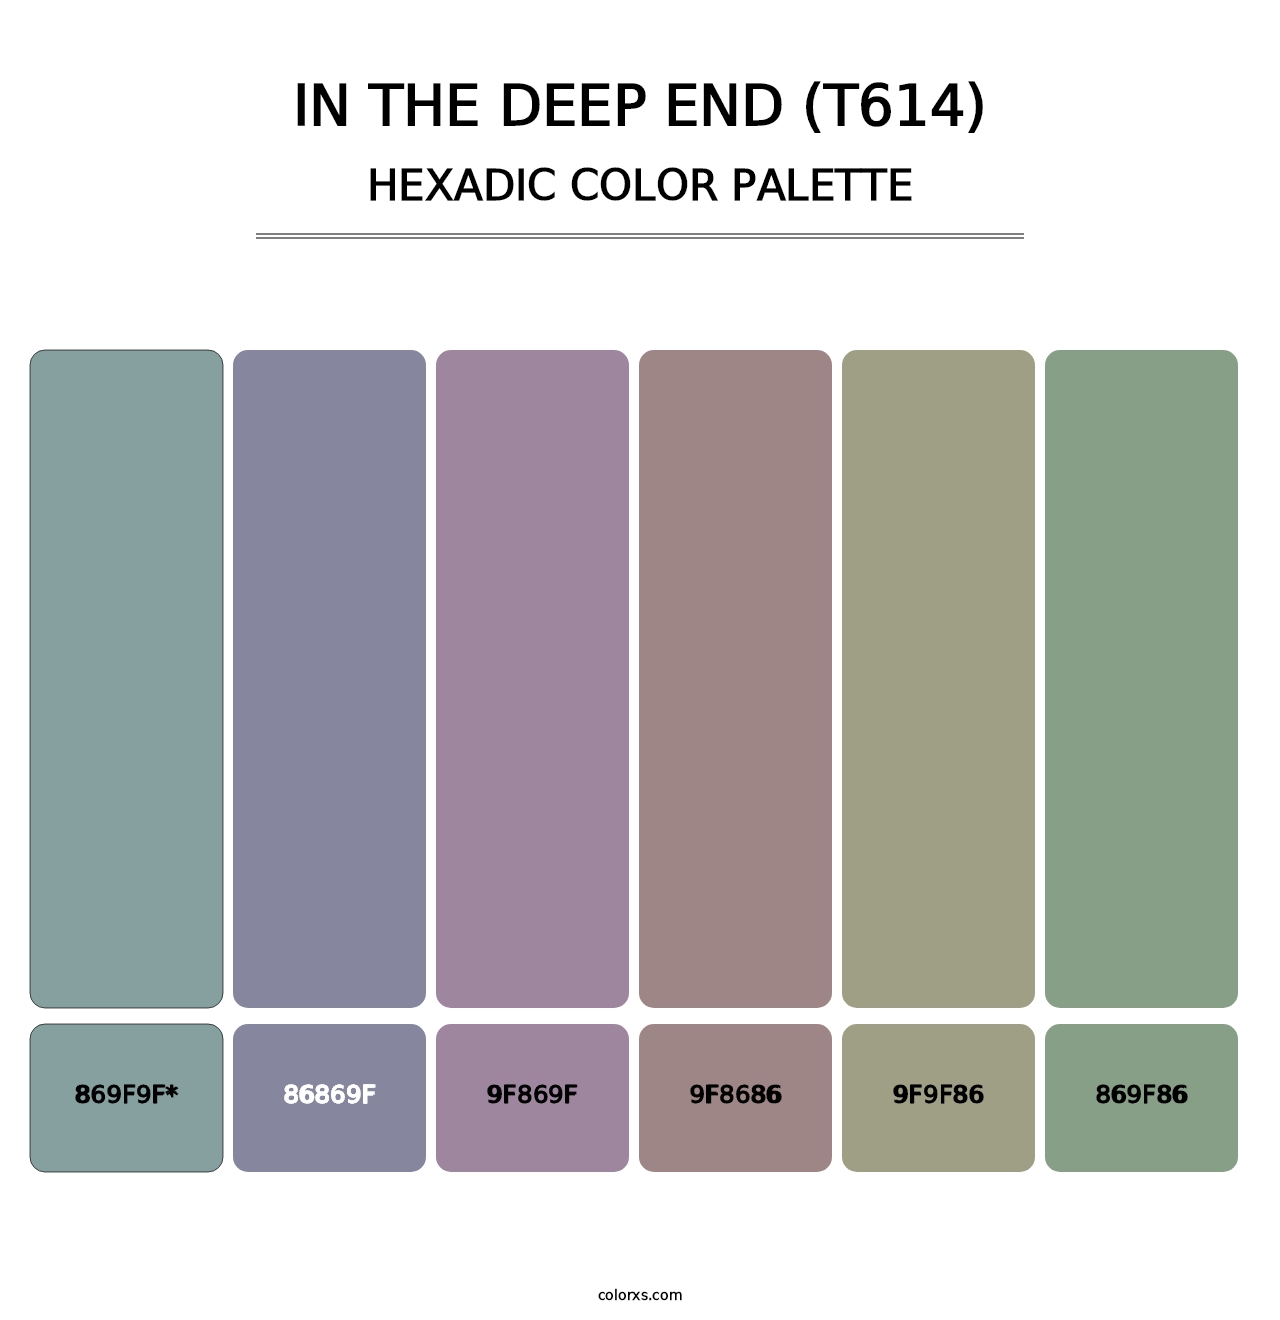 In the Deep End (T614) - Hexadic Color Palette